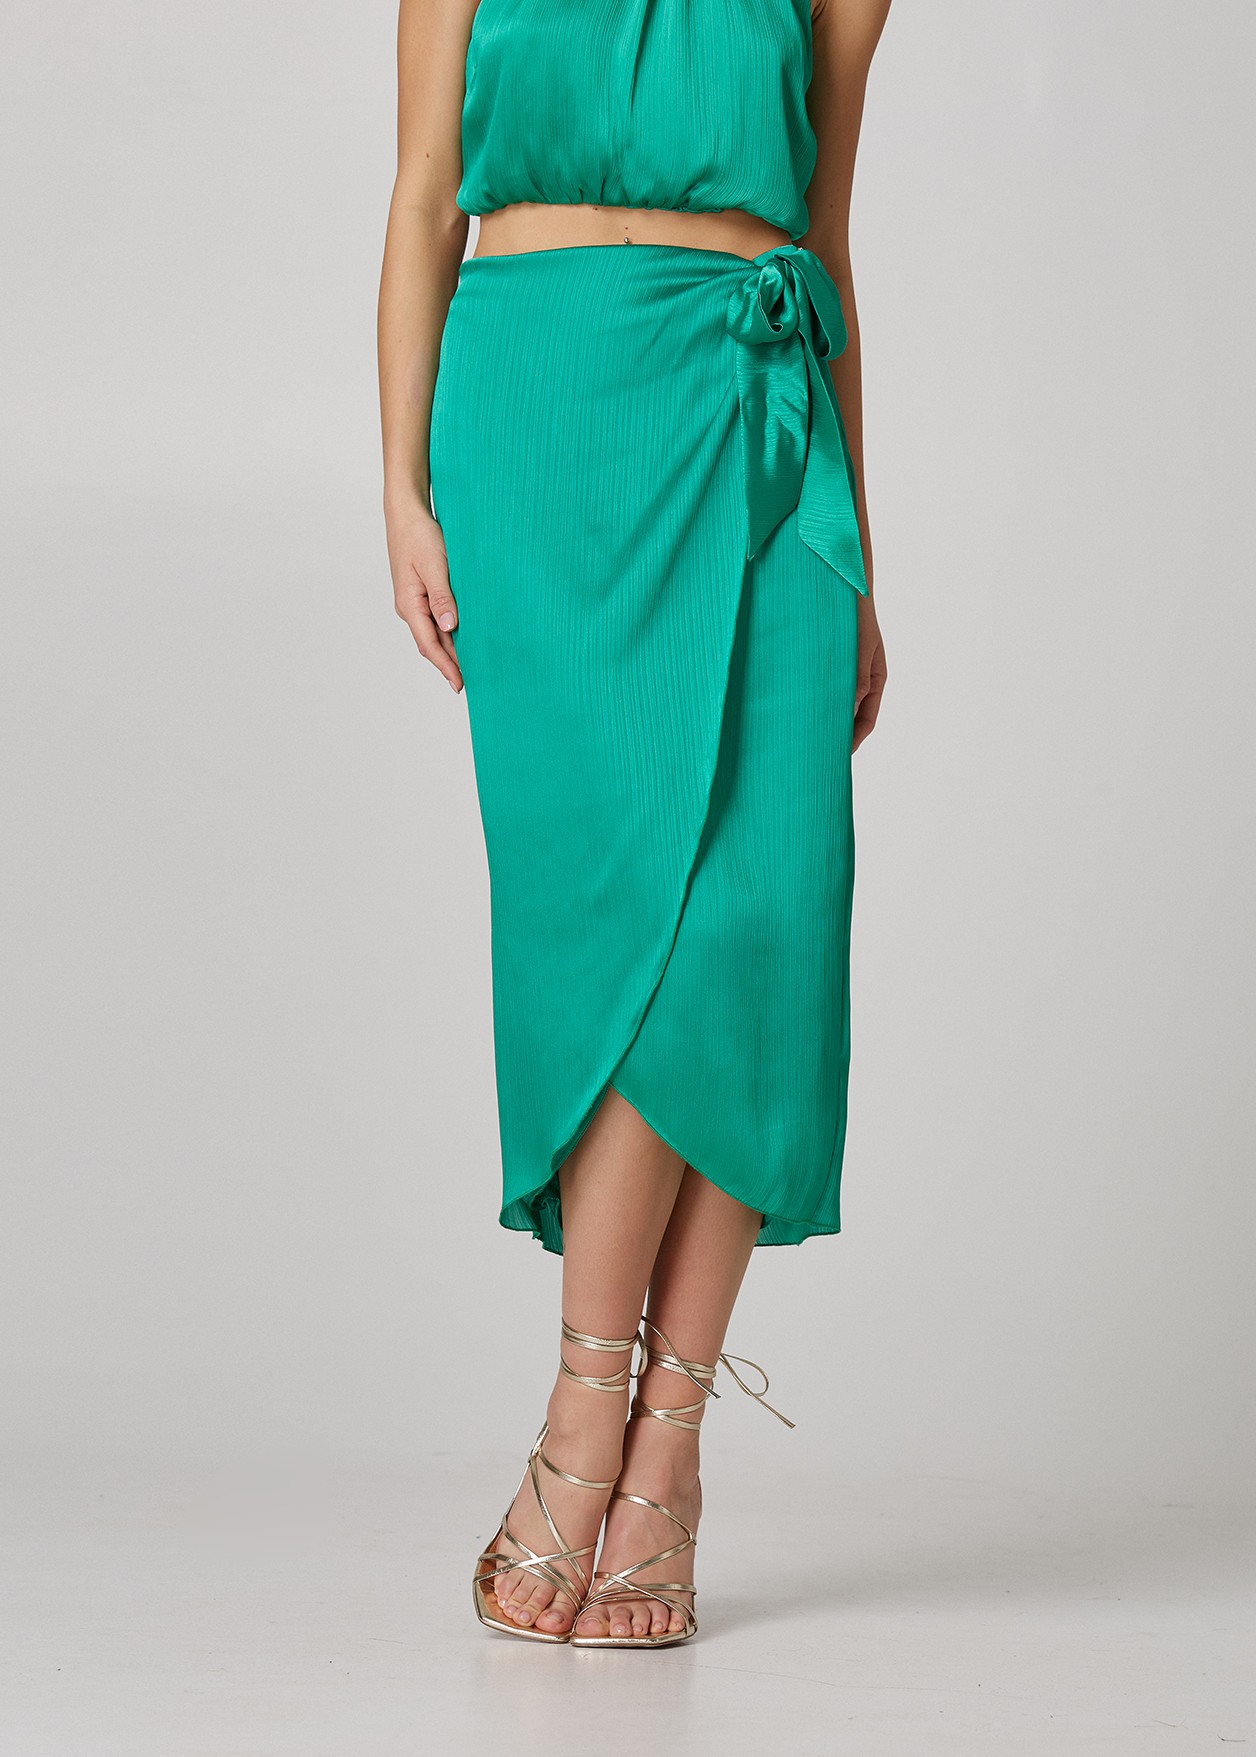 Satin look skirt with layers